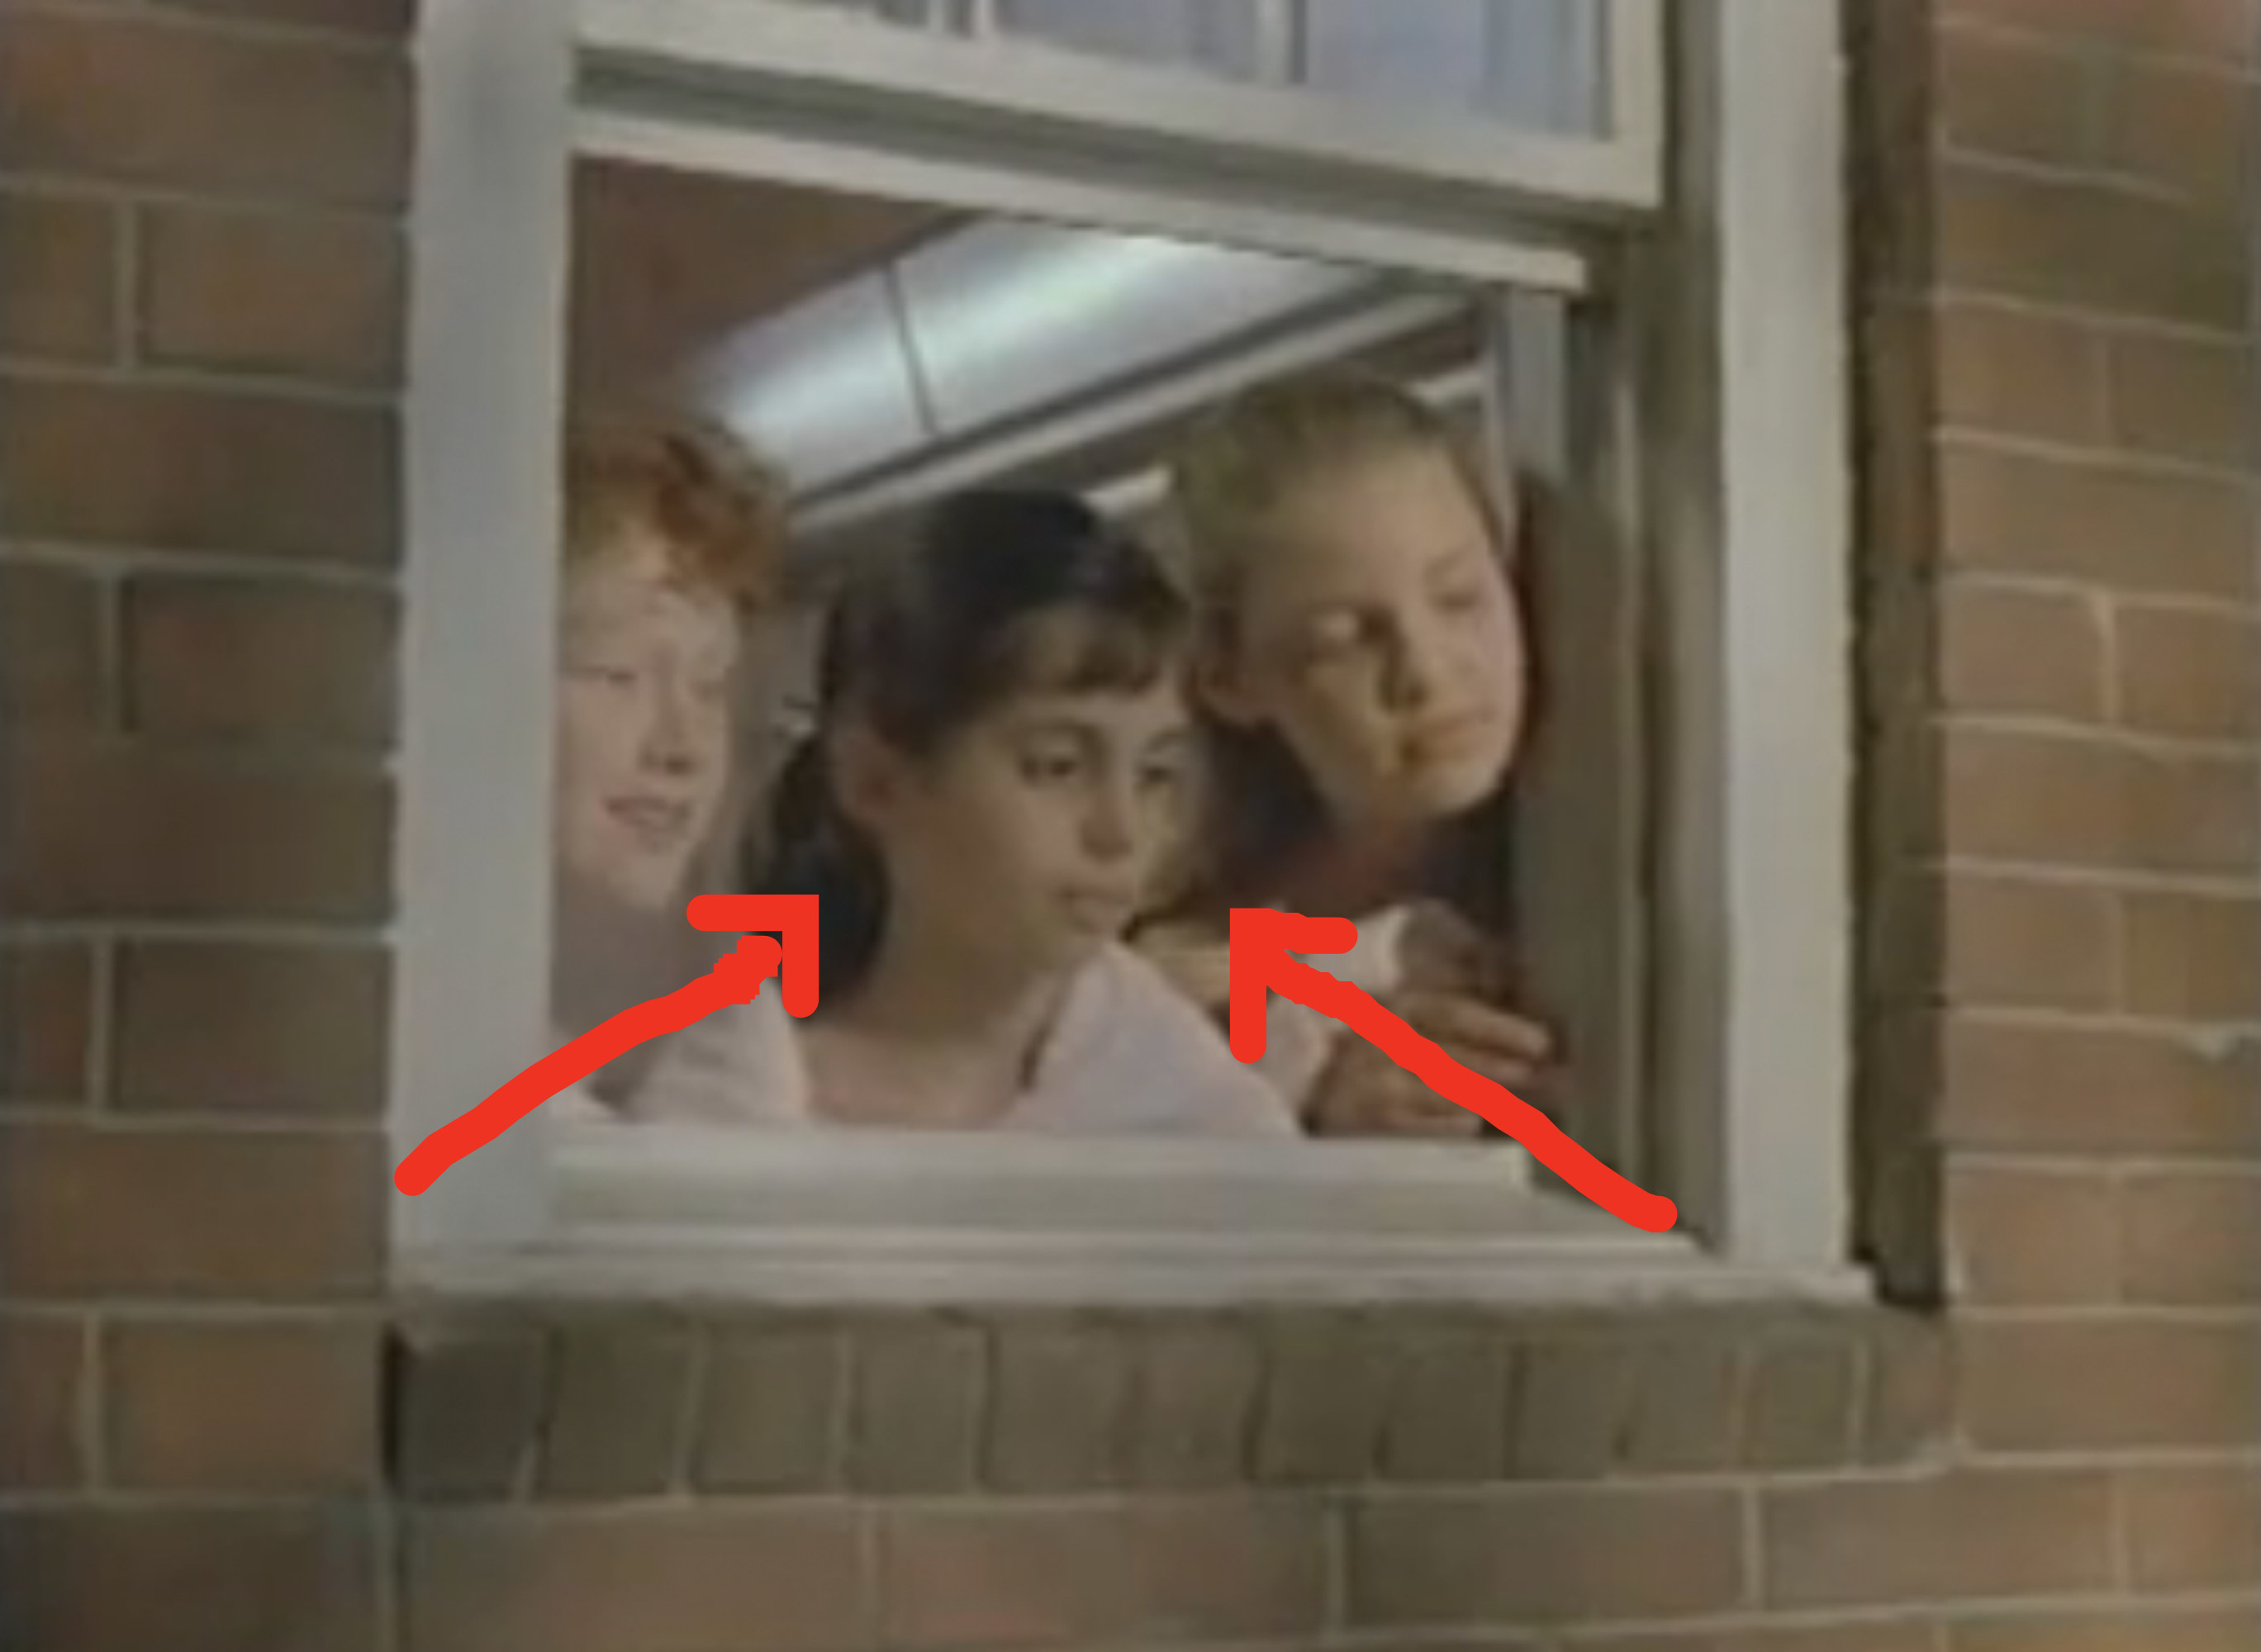 arrows now pointing to Eliza at the window sill